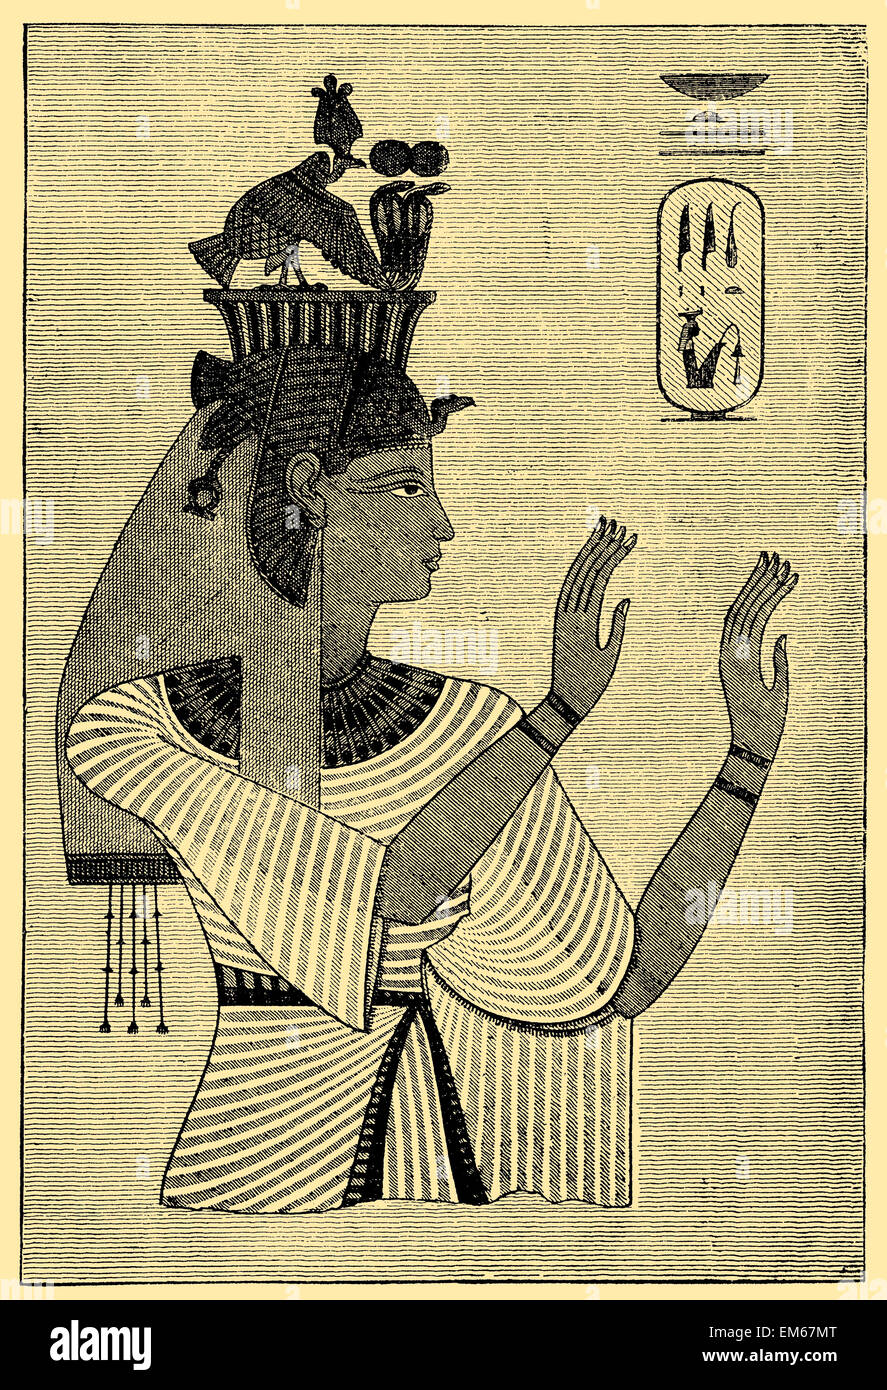 Tiye (c. 1398 BC – 1338 BC), Great Royal Wife of the Egyptian pharaoh Amenhotep III and matriarch of the Amarna family Stock Photo